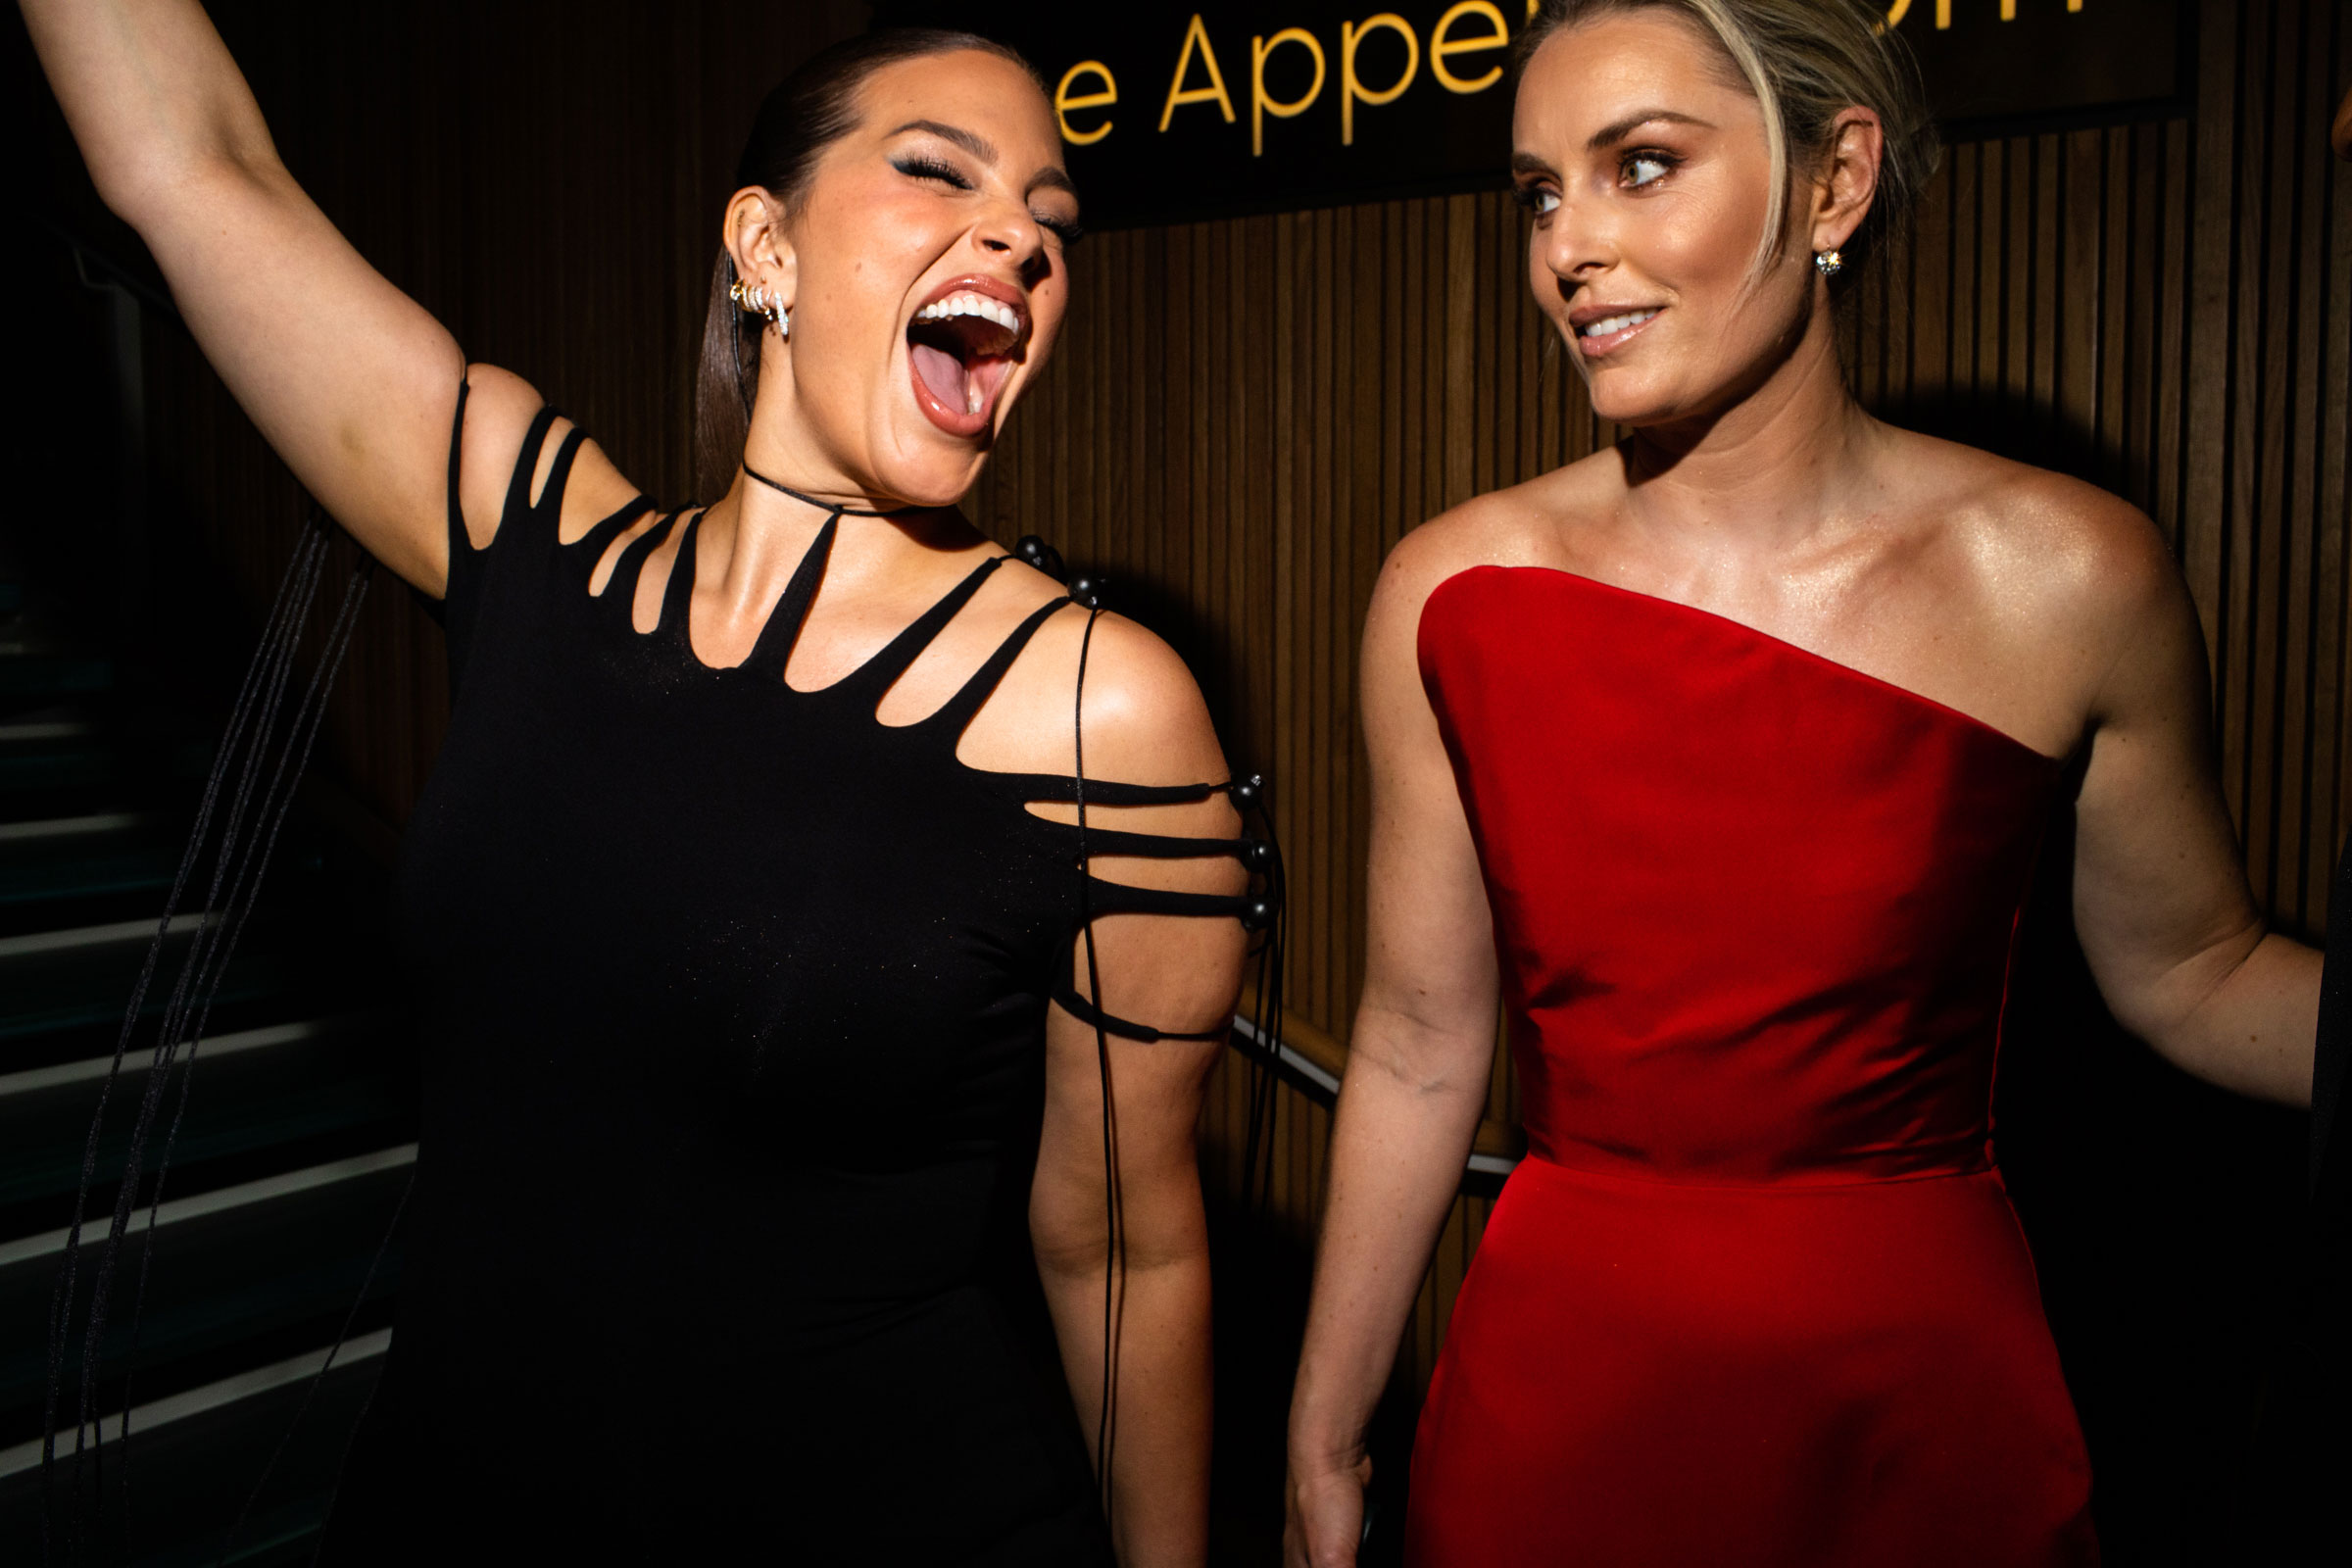 Model Ashley Graham and Lindsey Vonn attend the TIME 100 Gala at Jazz at Lincoln Center in New York City, on April 26, 2023. (Landon Nordeman for TIME)